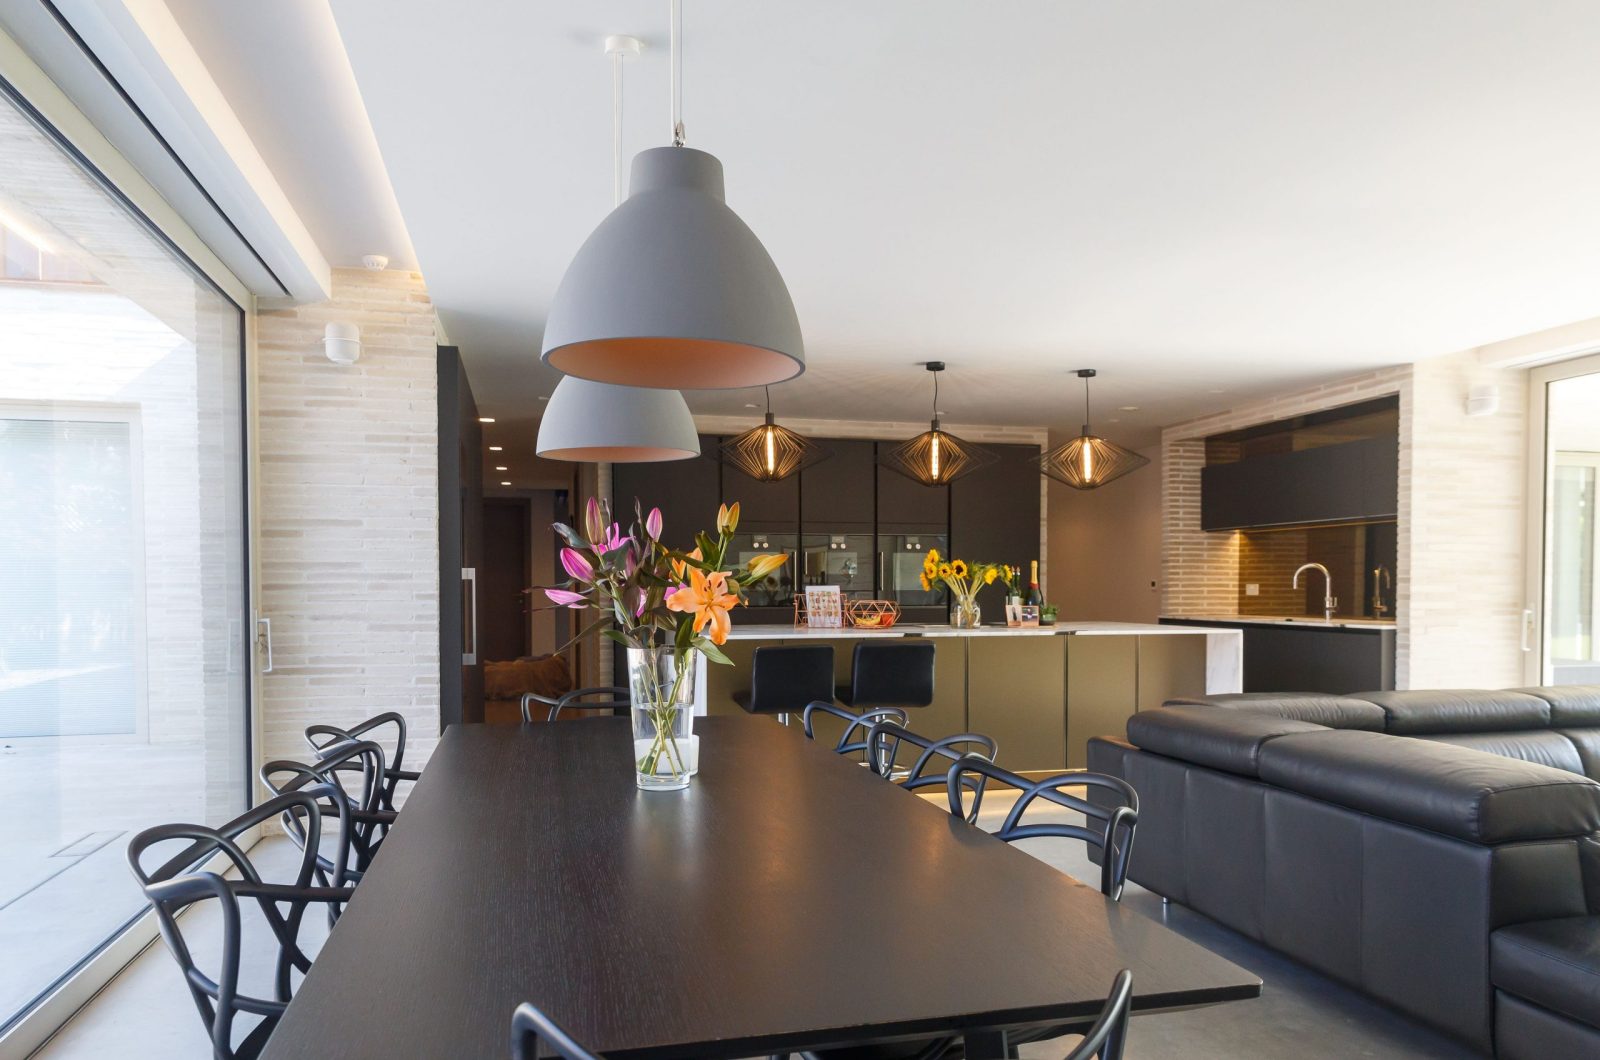 Studio Spicer Project open plan kitchen overlooking the 8 seater dining table onto the breakfast bar